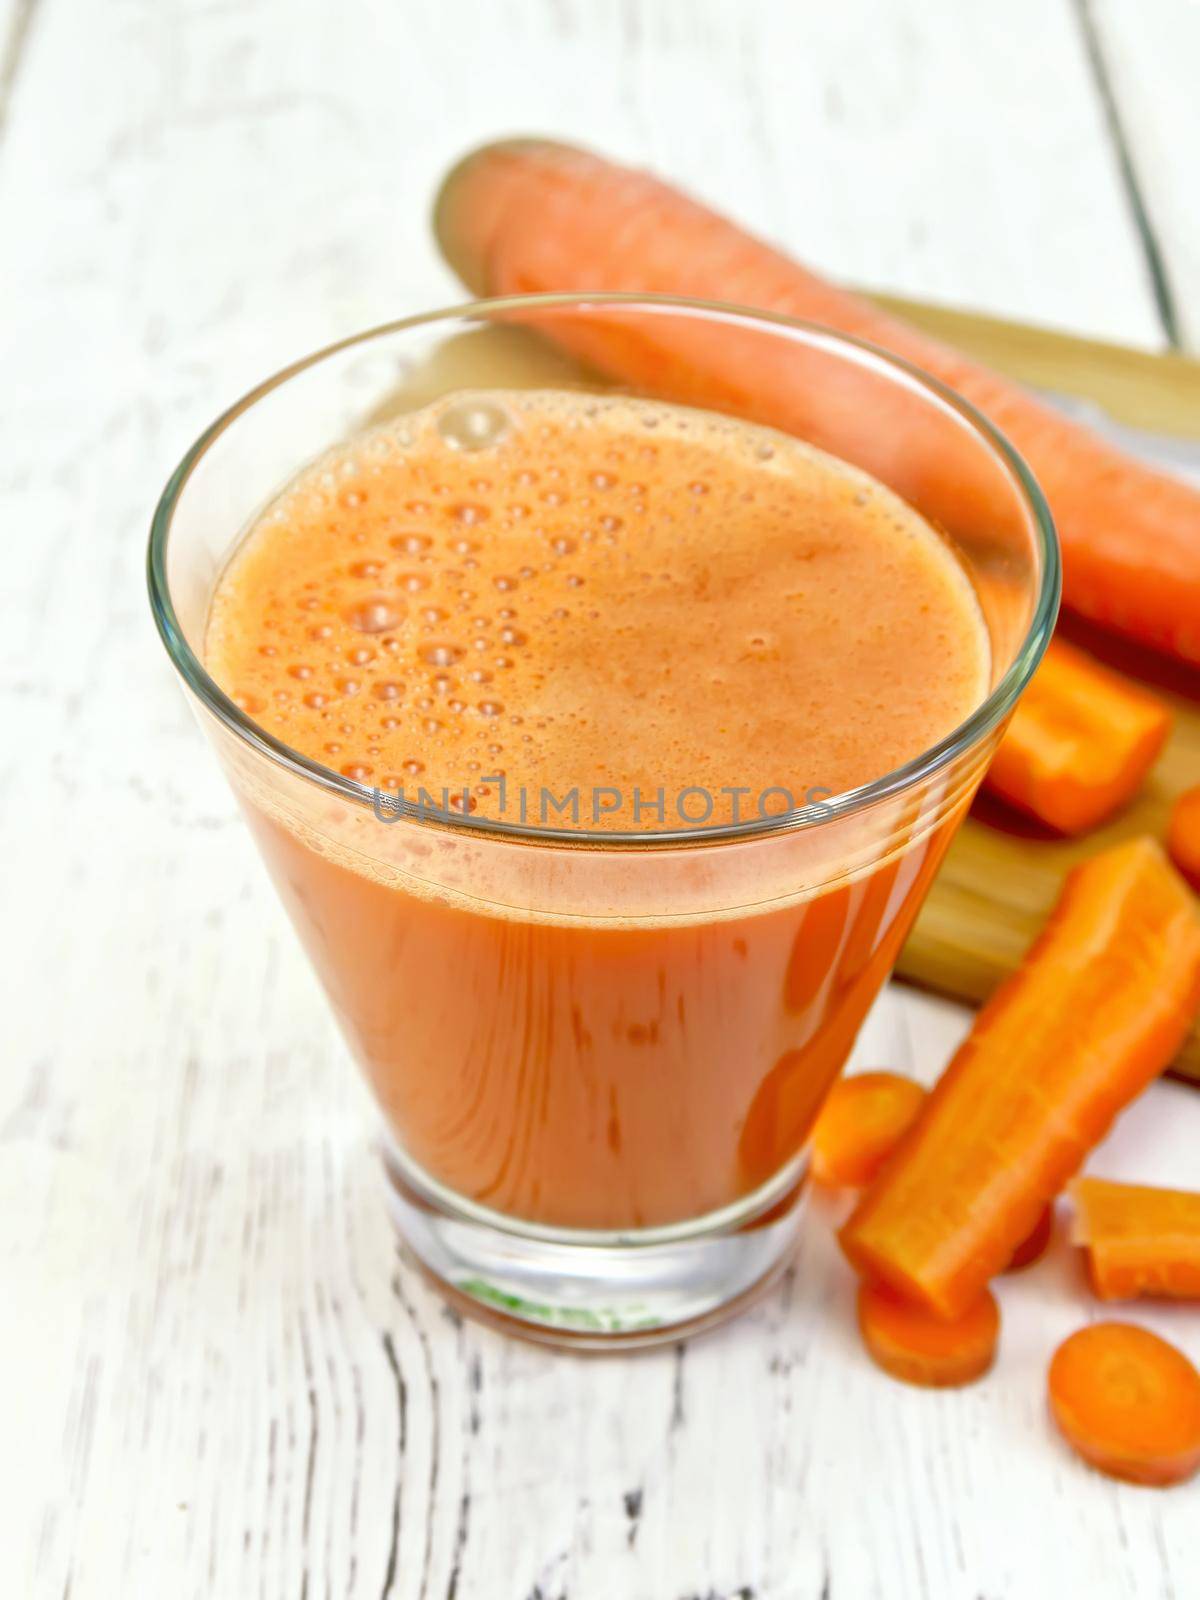 Carrot juice in a tall glass, vegetables on the background of wooden boards